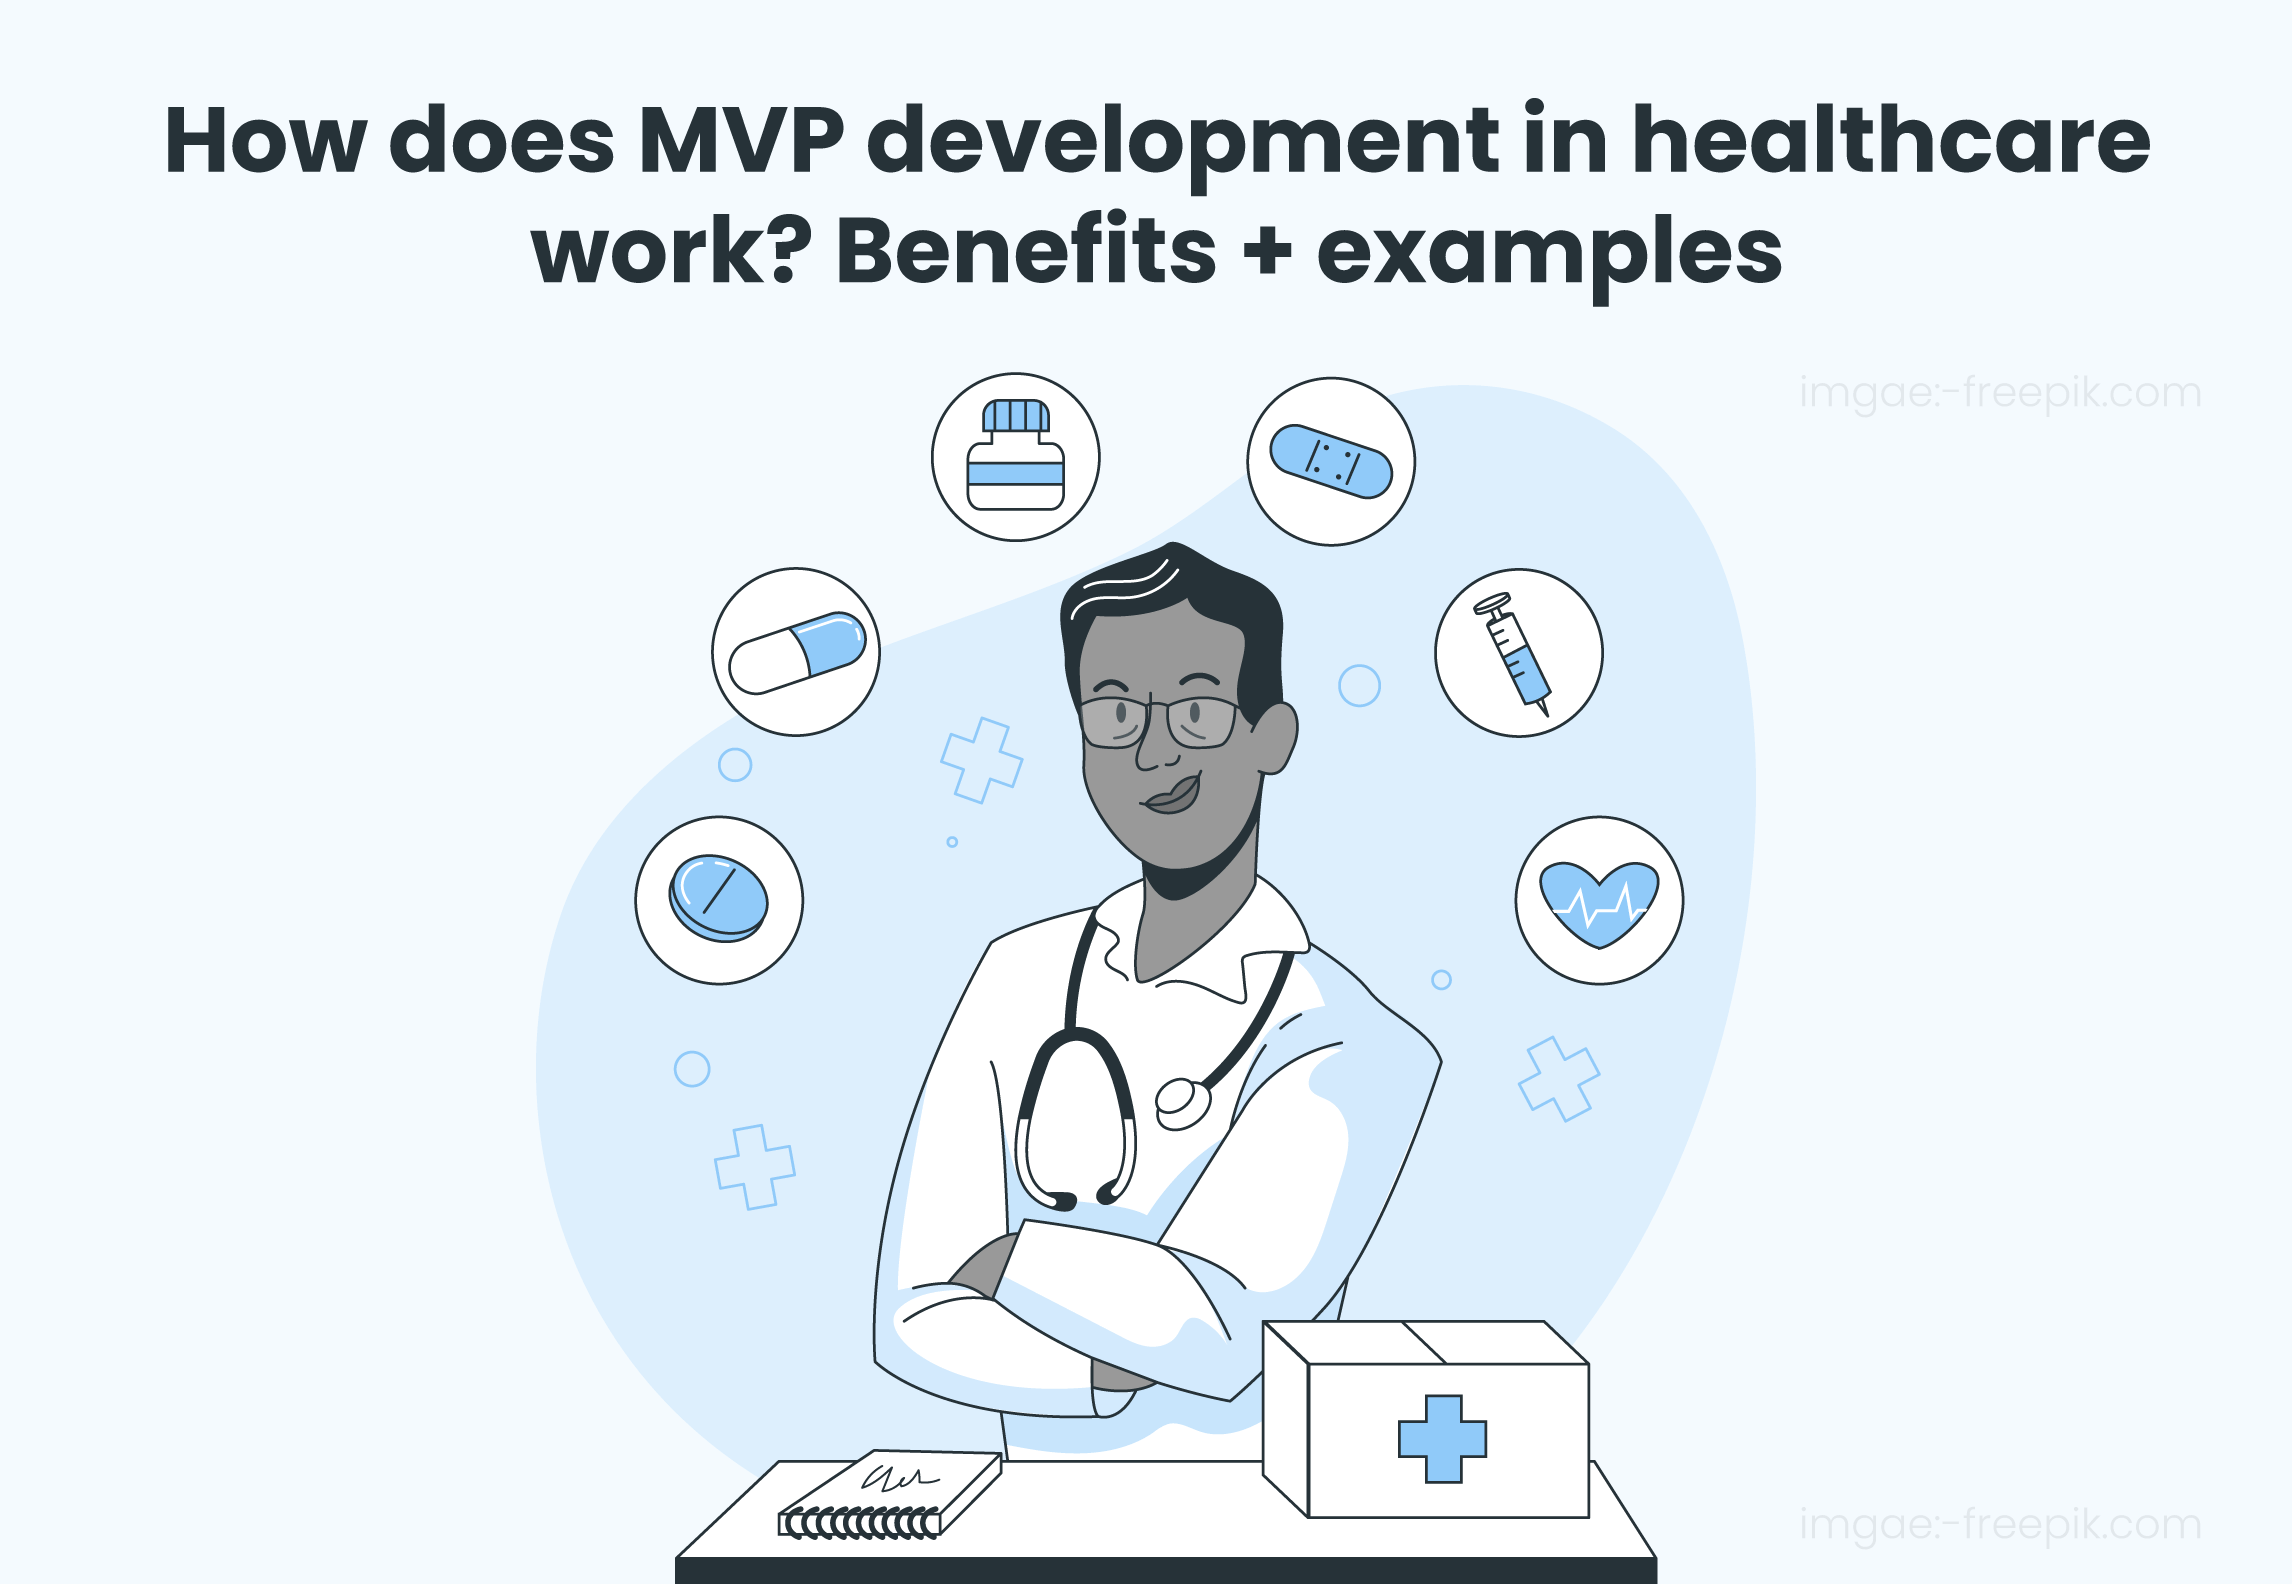 MVP Development in Healthcare: Process, Benefits, and Real-life Examples